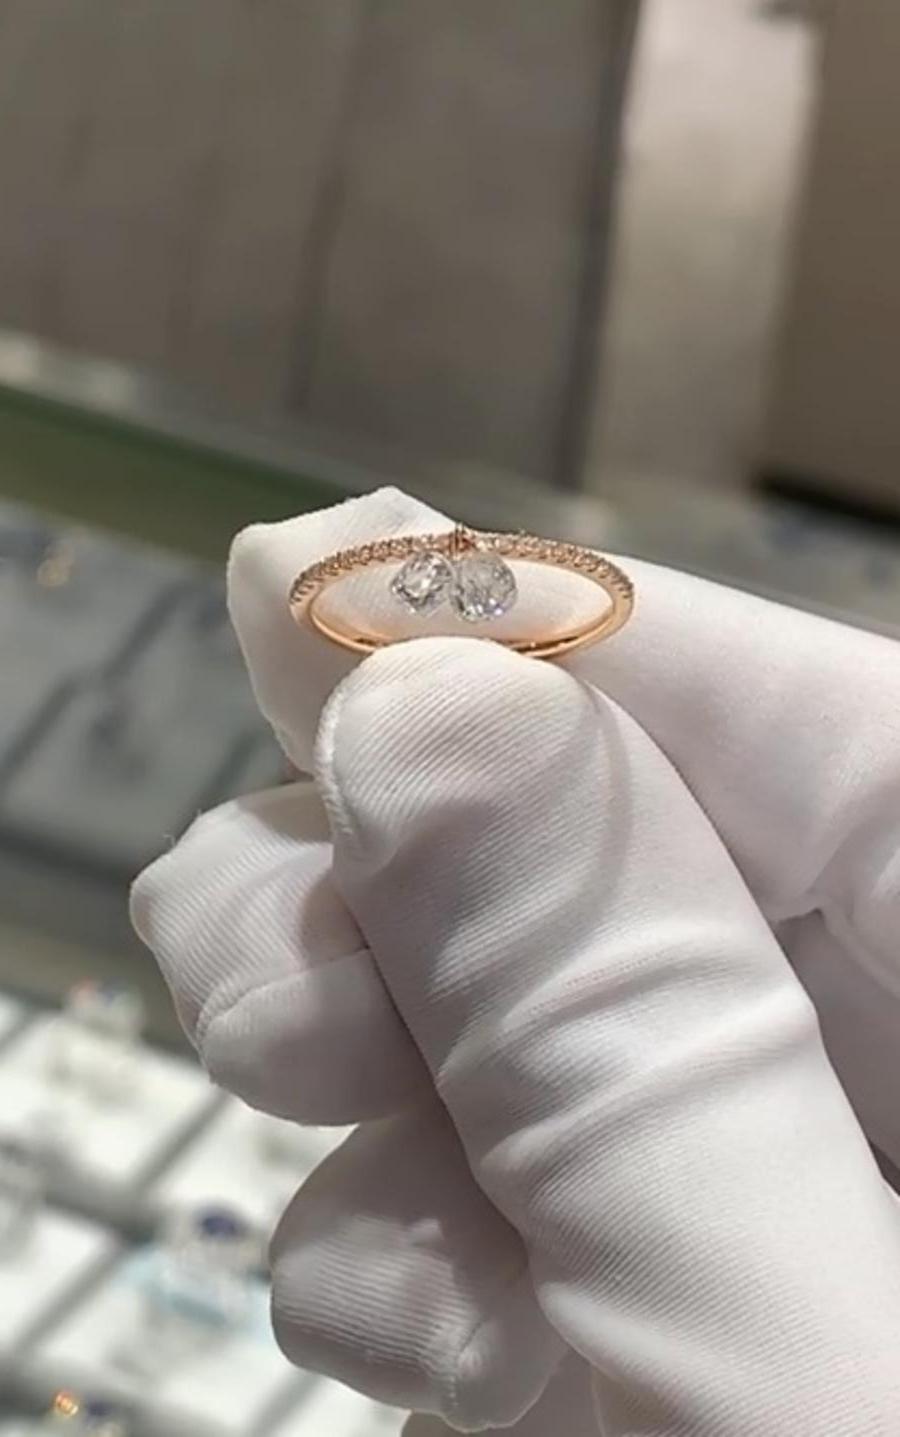 PANIM Trinity Cluster Diamond Briolette Dangling Ring 18 Karat Gold

Inspired by the beauty of a rain drop, Our Briolette Dangling diamond ring is an absolute show-stopper.
It has 3 piece of Rain Drops White Diamond Briolettes with diamond band